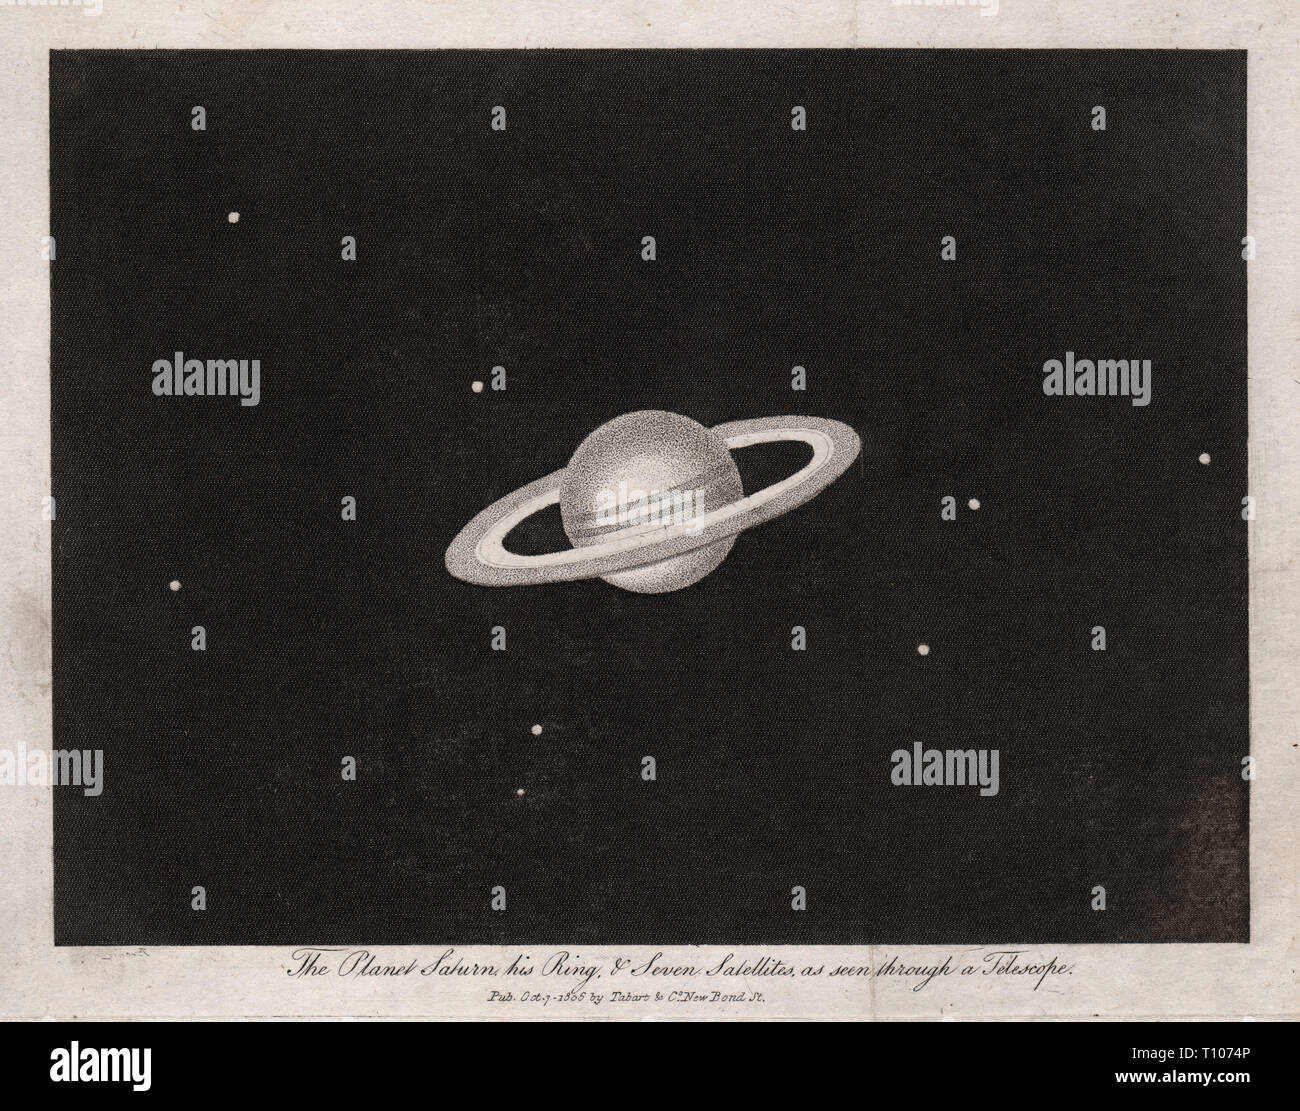 1804 Astronomy Print of Saturn and its Seven Moons - Digitally Enhanced Version Stock Photo